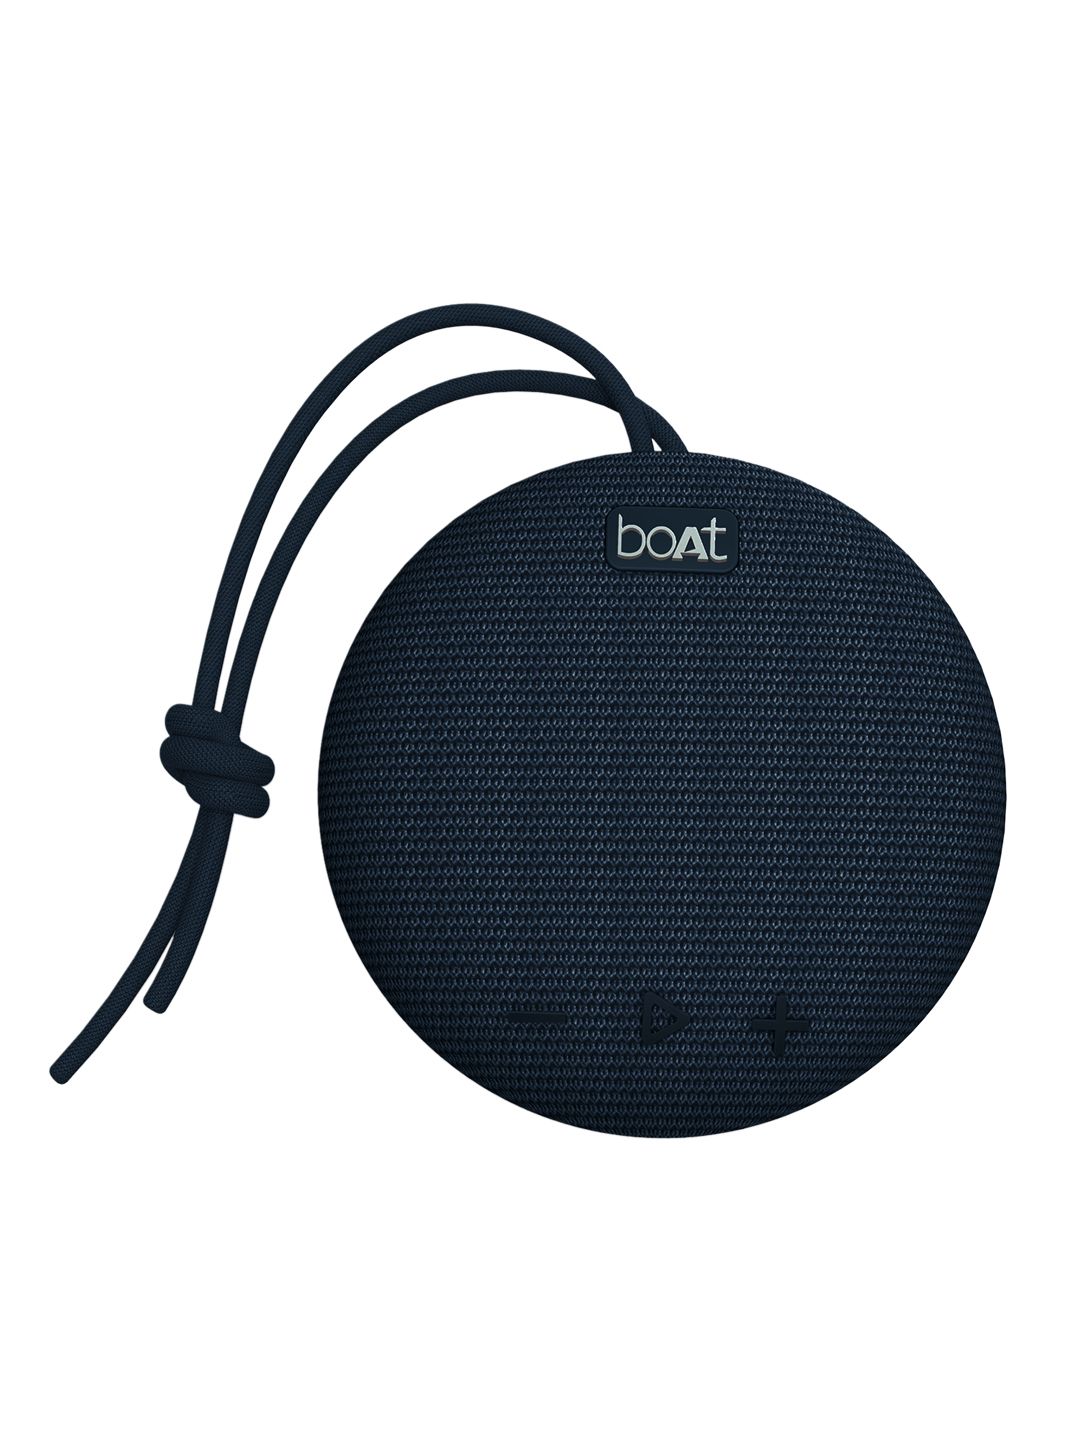 boAt Stone 190 5W Blue Portable Wireless Speaker with IPX7 and Bluetooth V5.0 Price in India